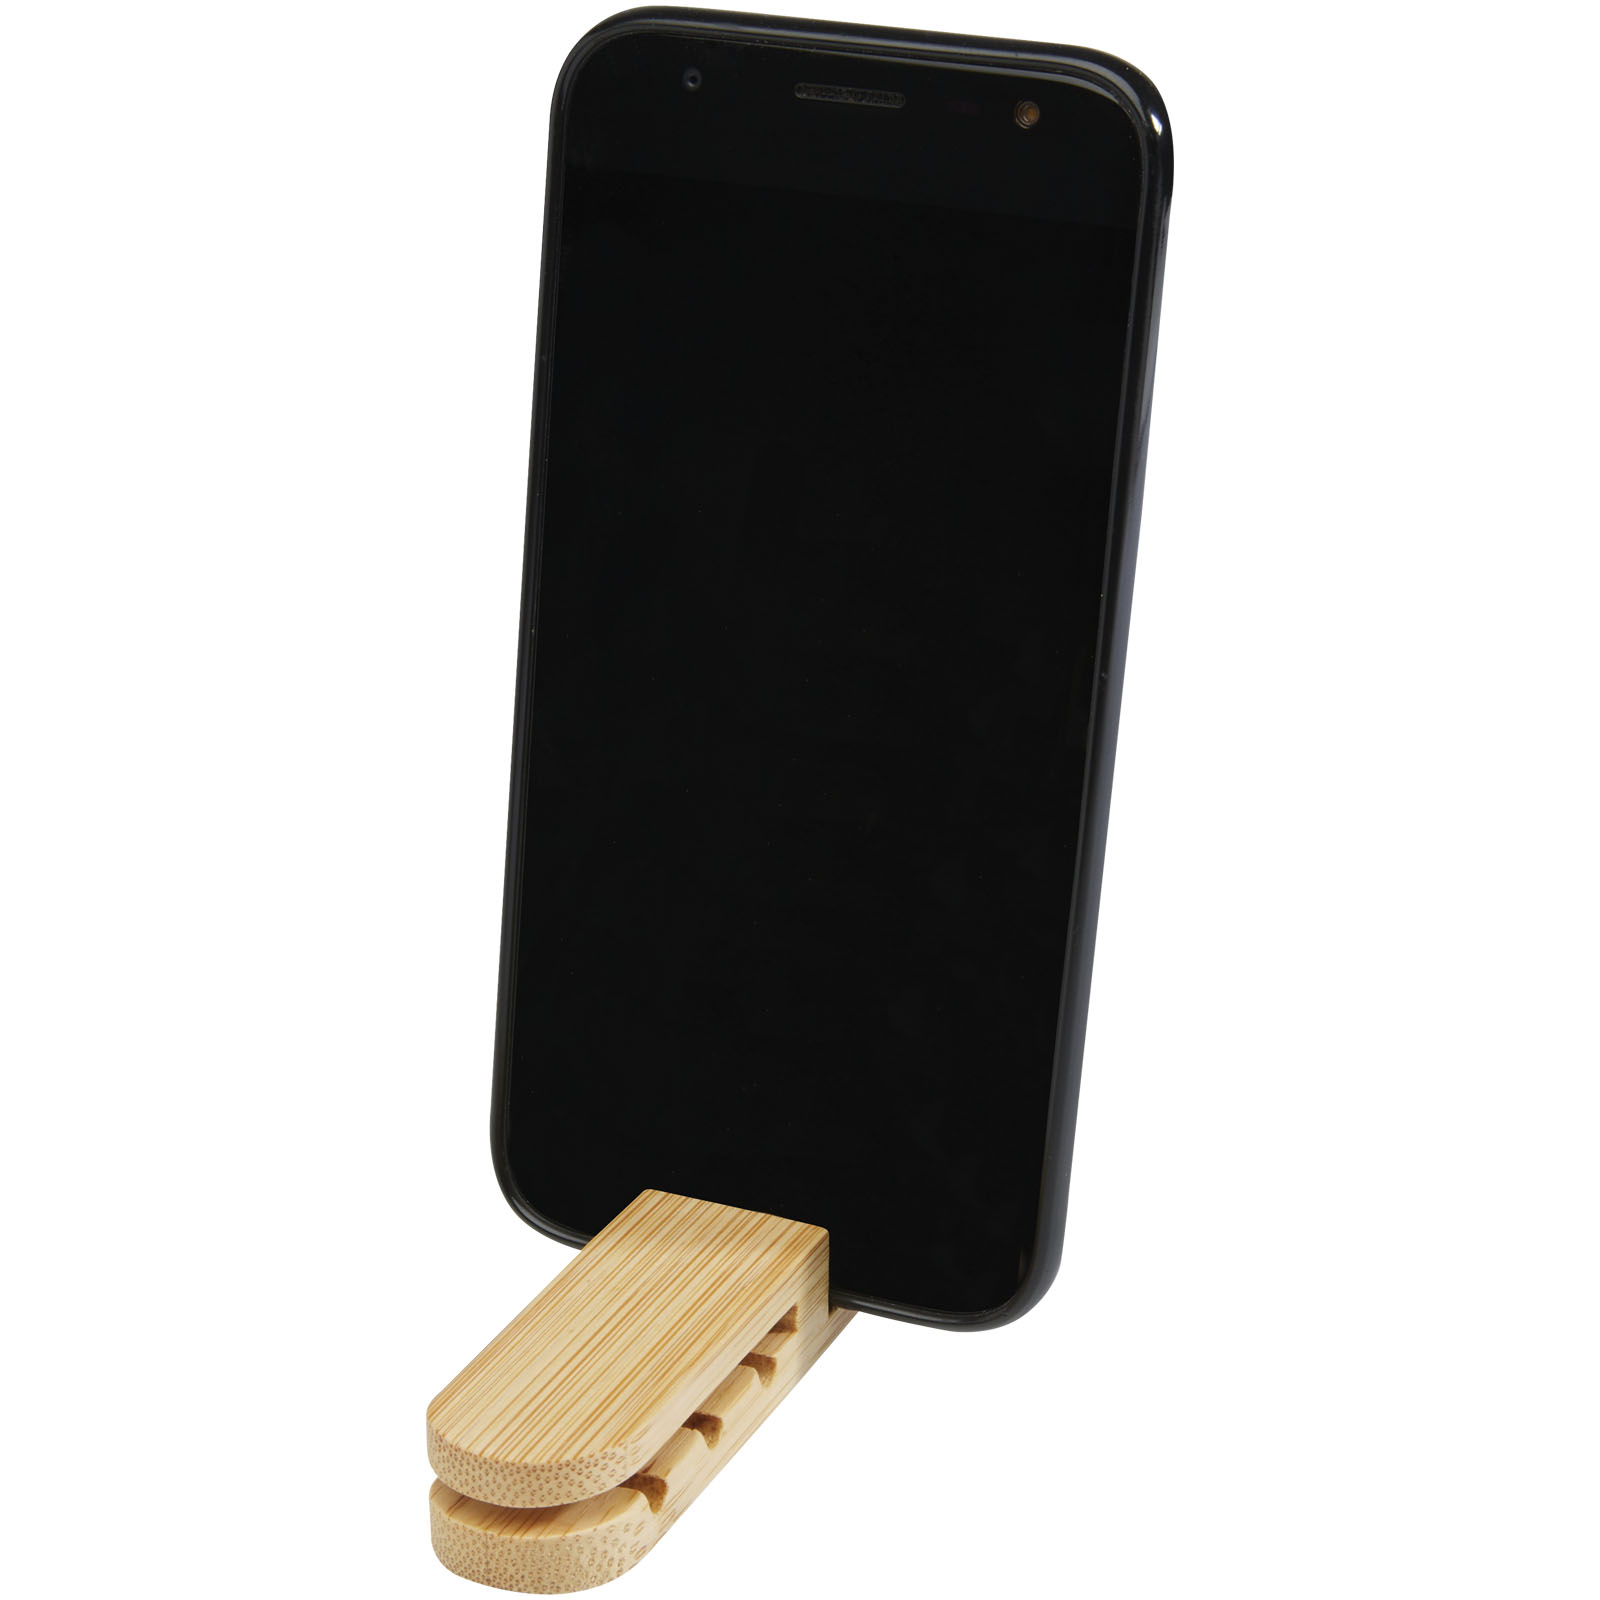 Advertising Telephone & Tablet Accessories - Edulis bamboo cable manager  - 4